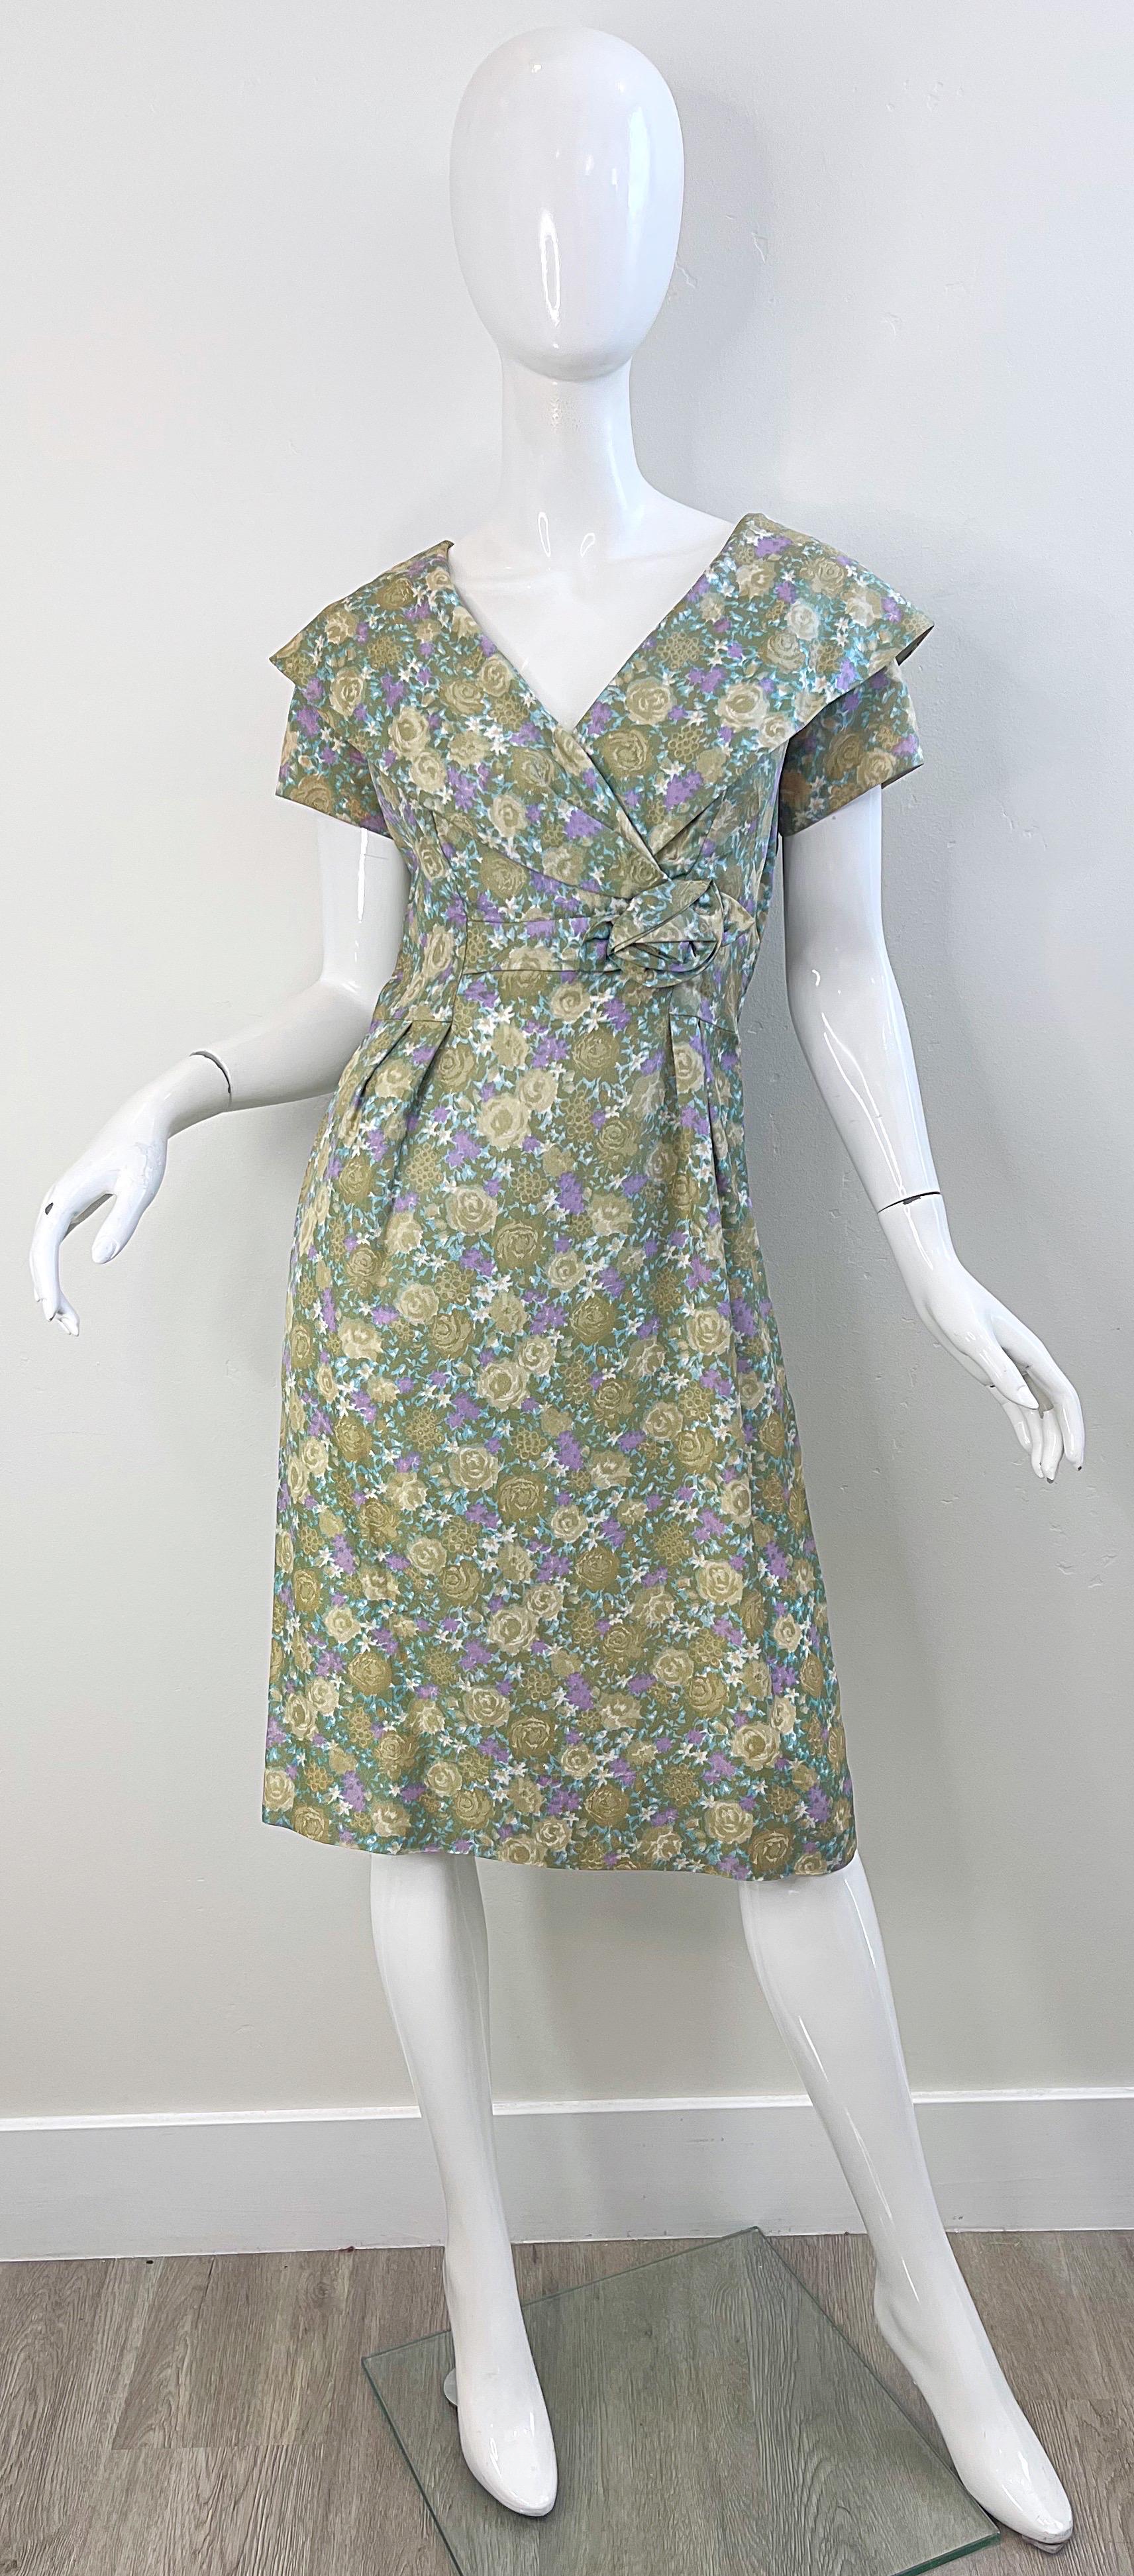 Beautiful 1950s demi couture shawl collar short sleeve silk dress ! Features floral prints in different shades of green, tan and purple Hidden metal zipper up the back. Tailored bodice with a forgiving skirt. Extremely well made with so much